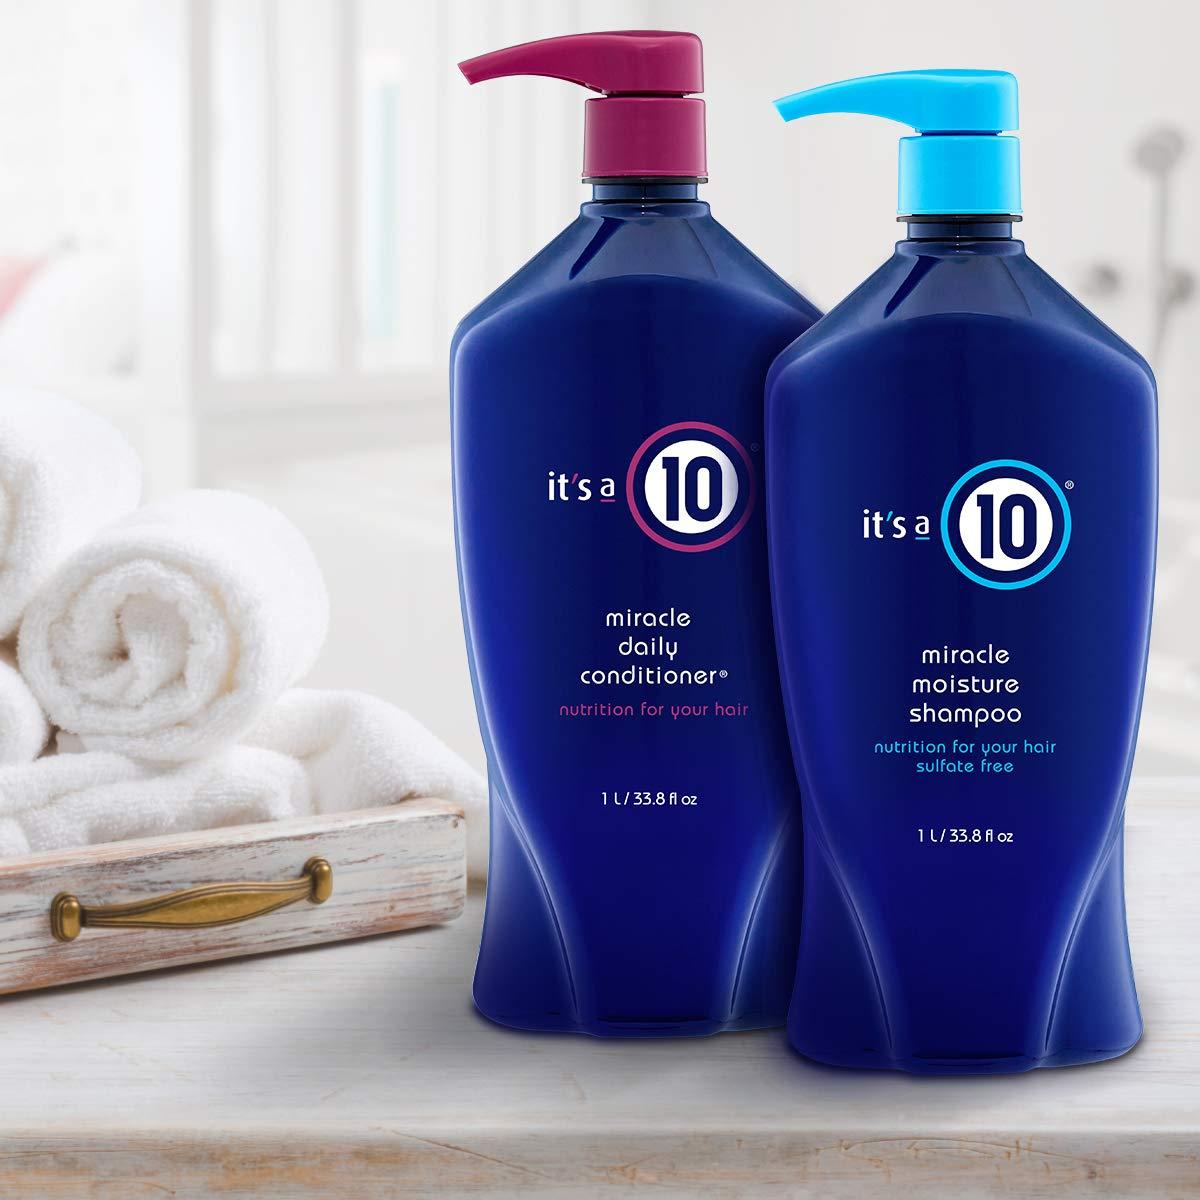 It's A 10 Miracle Shampoo & Conditioner Large Combo Set 33.8 oz